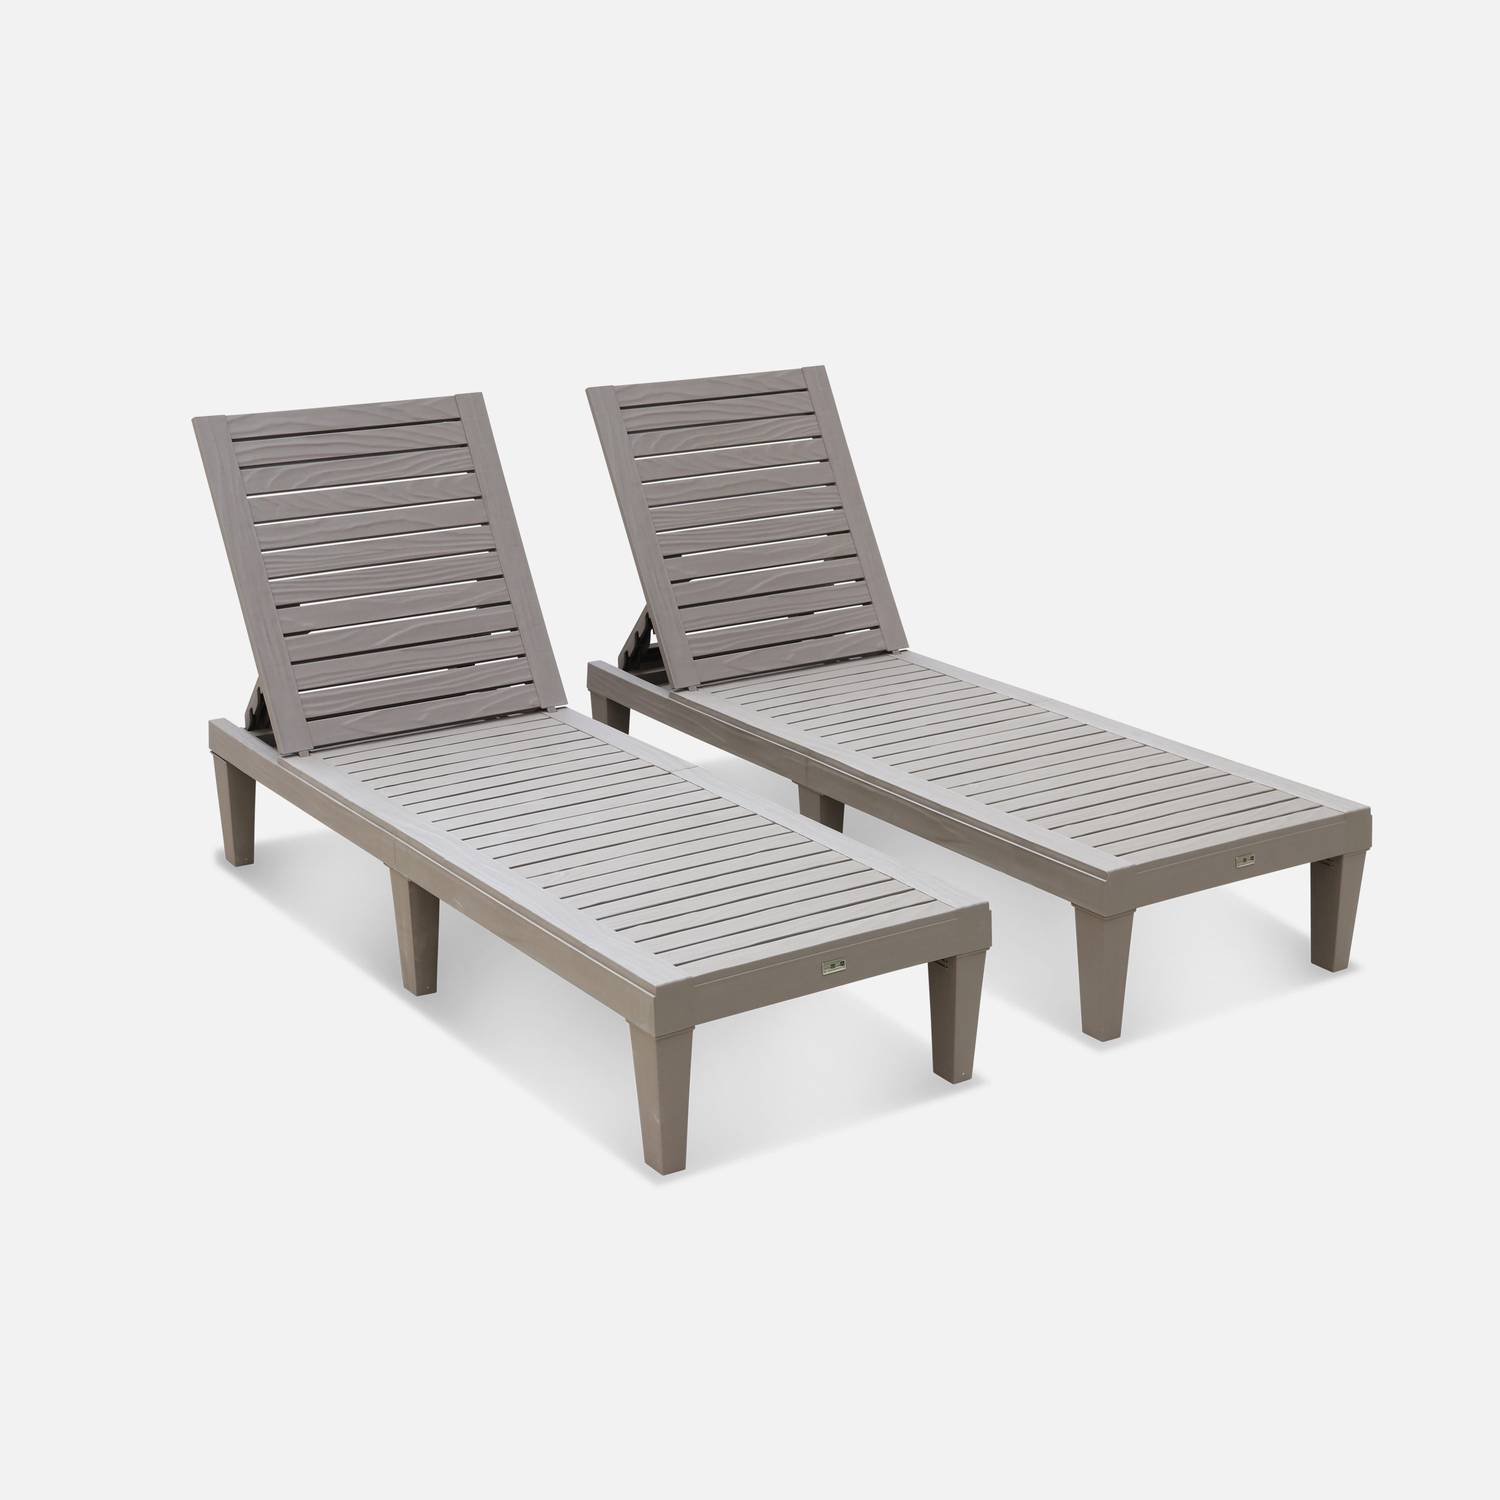 Pair of plastic loungers, multi position sun beds with textured wood effect - Pia - Grey Photo2